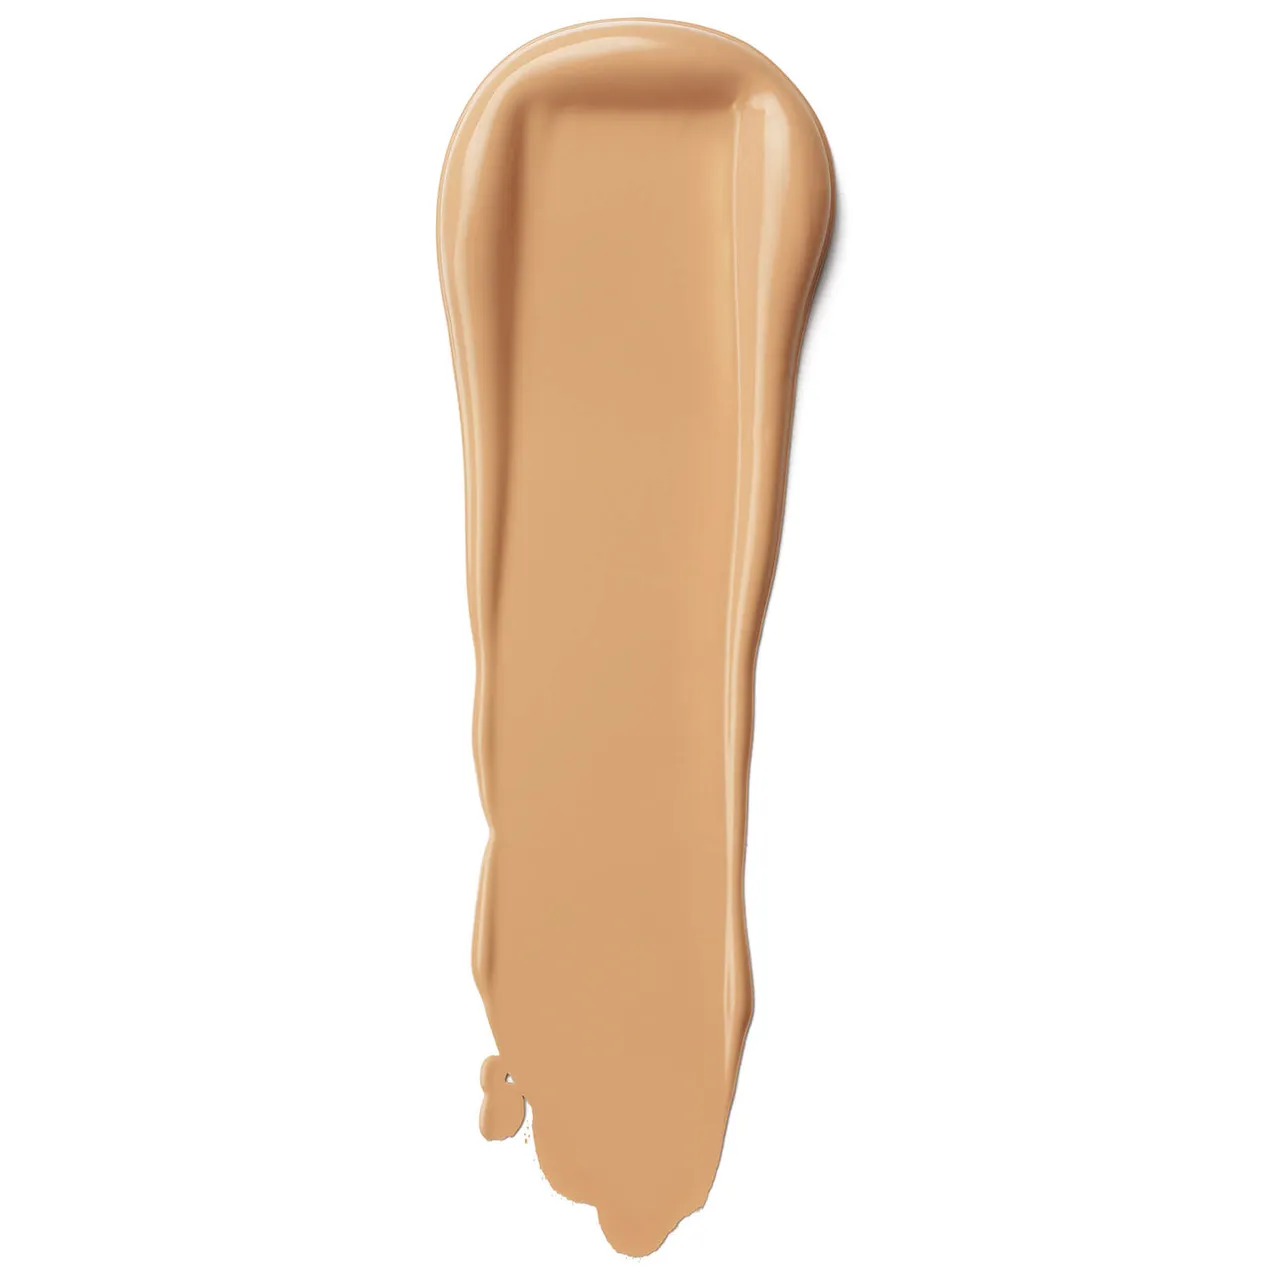 Clinique Beyond Perfecting Foundation and Concealer 30ml (Various Shades) - Honey